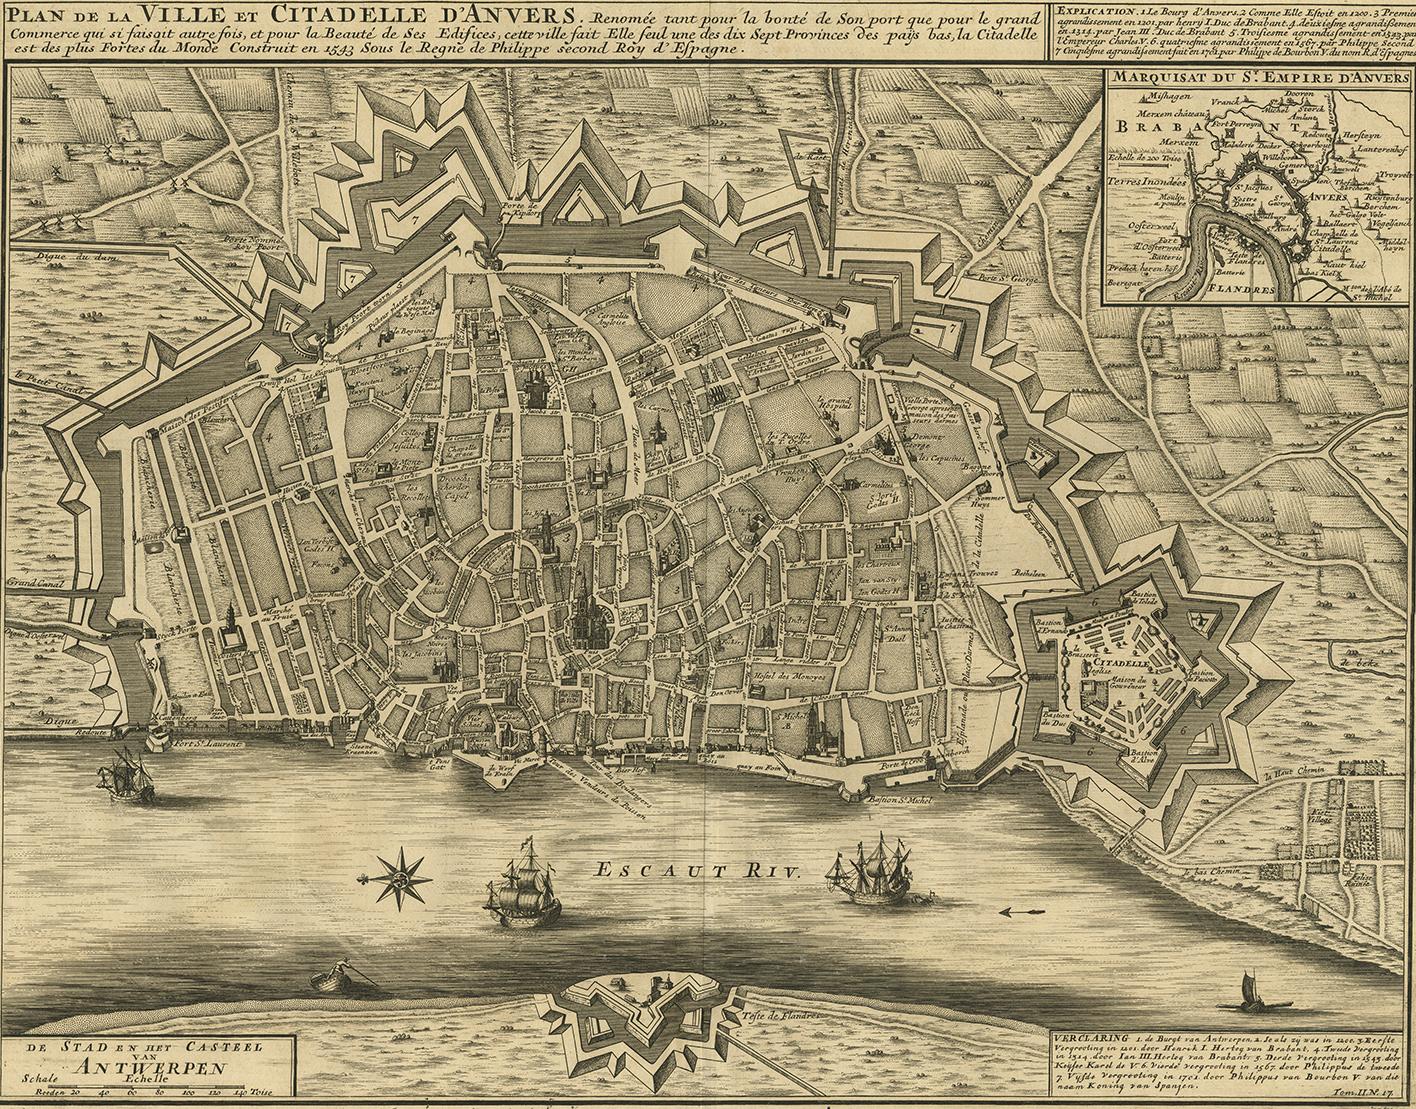 Copper-engraving by A. Deur. Published by I. van der Kloot in Den Haag, 1729. With French and Dutch title-cartouches and explanatory notes, several ships on the Scheldt river and inset map of 